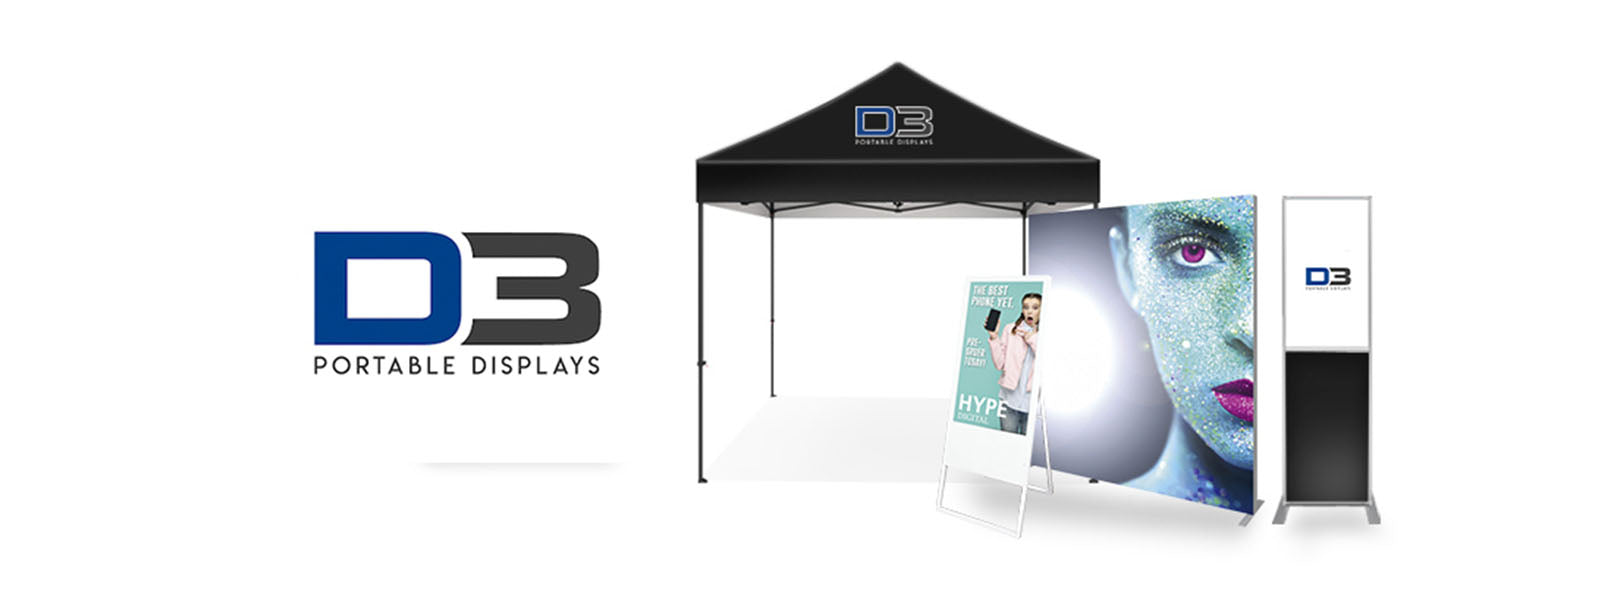 trade show displays cheap display bannerstands backwall graphics step and repeat